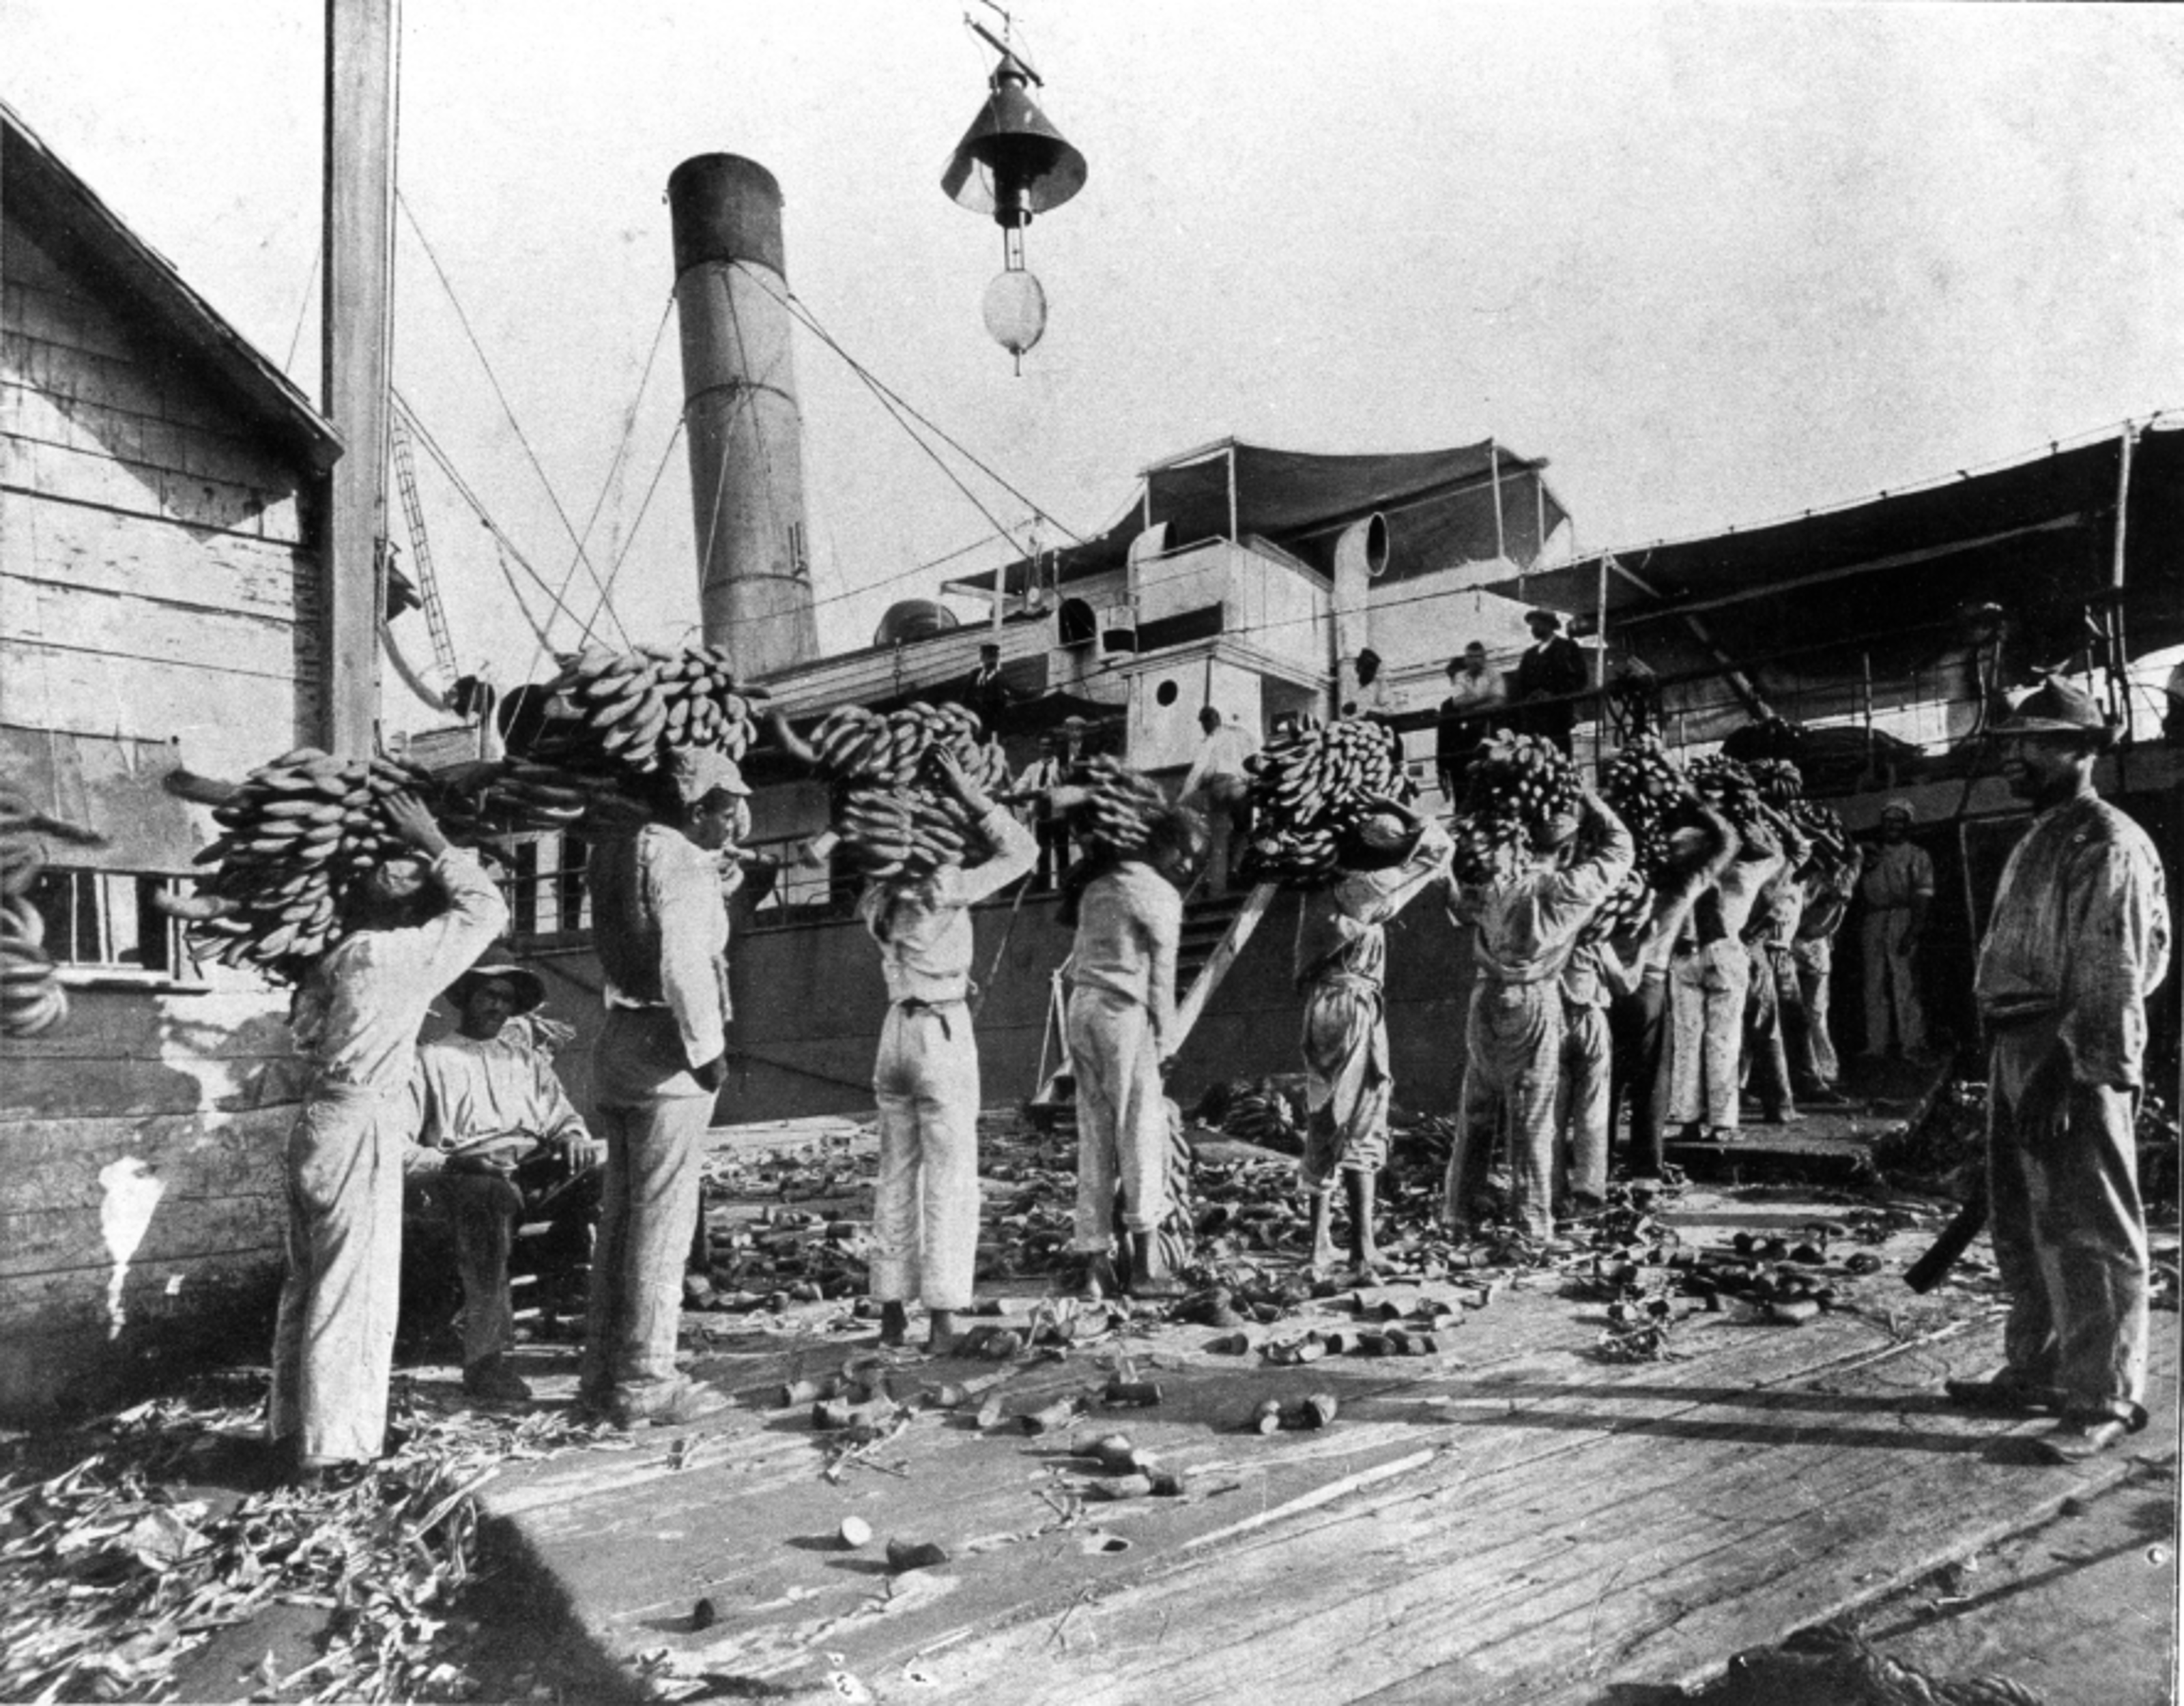 Banana workers carrying bananas during early 20th century Colombia